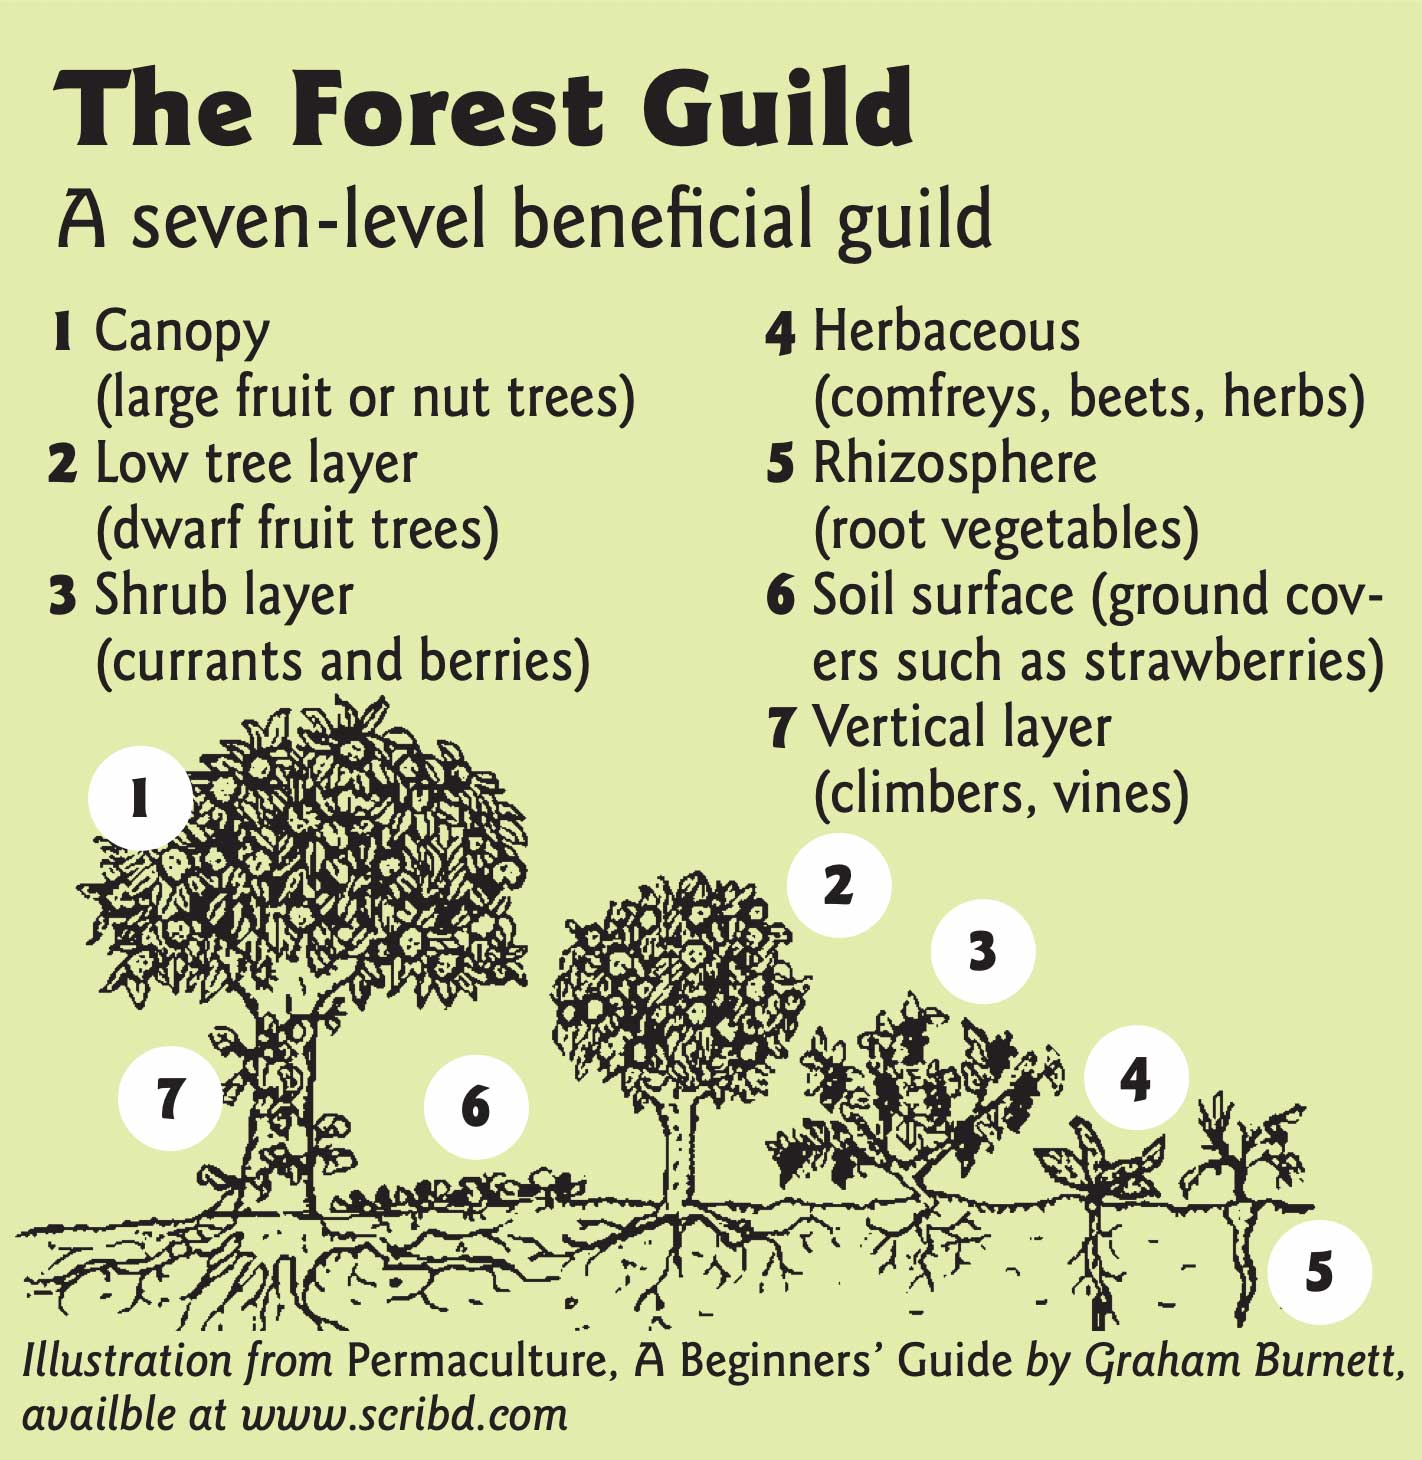 Forest Guild illustration showing how the heights of the plant layers described in the text relate to each other